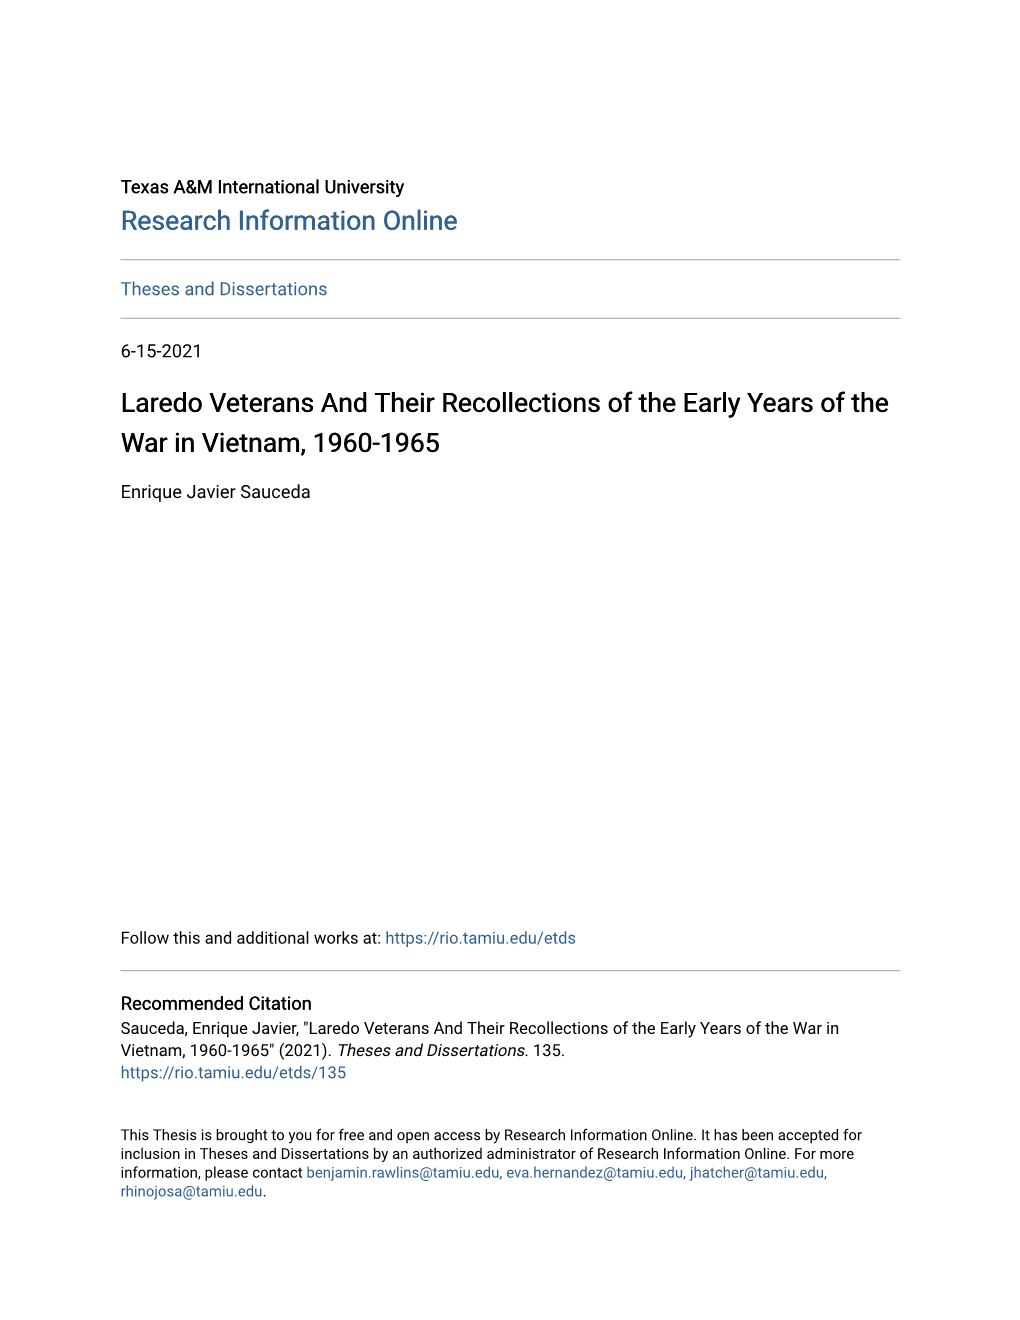 Laredo Veterans and Their Recollections of the Early Years of the War in Vietnam, 1960-1965